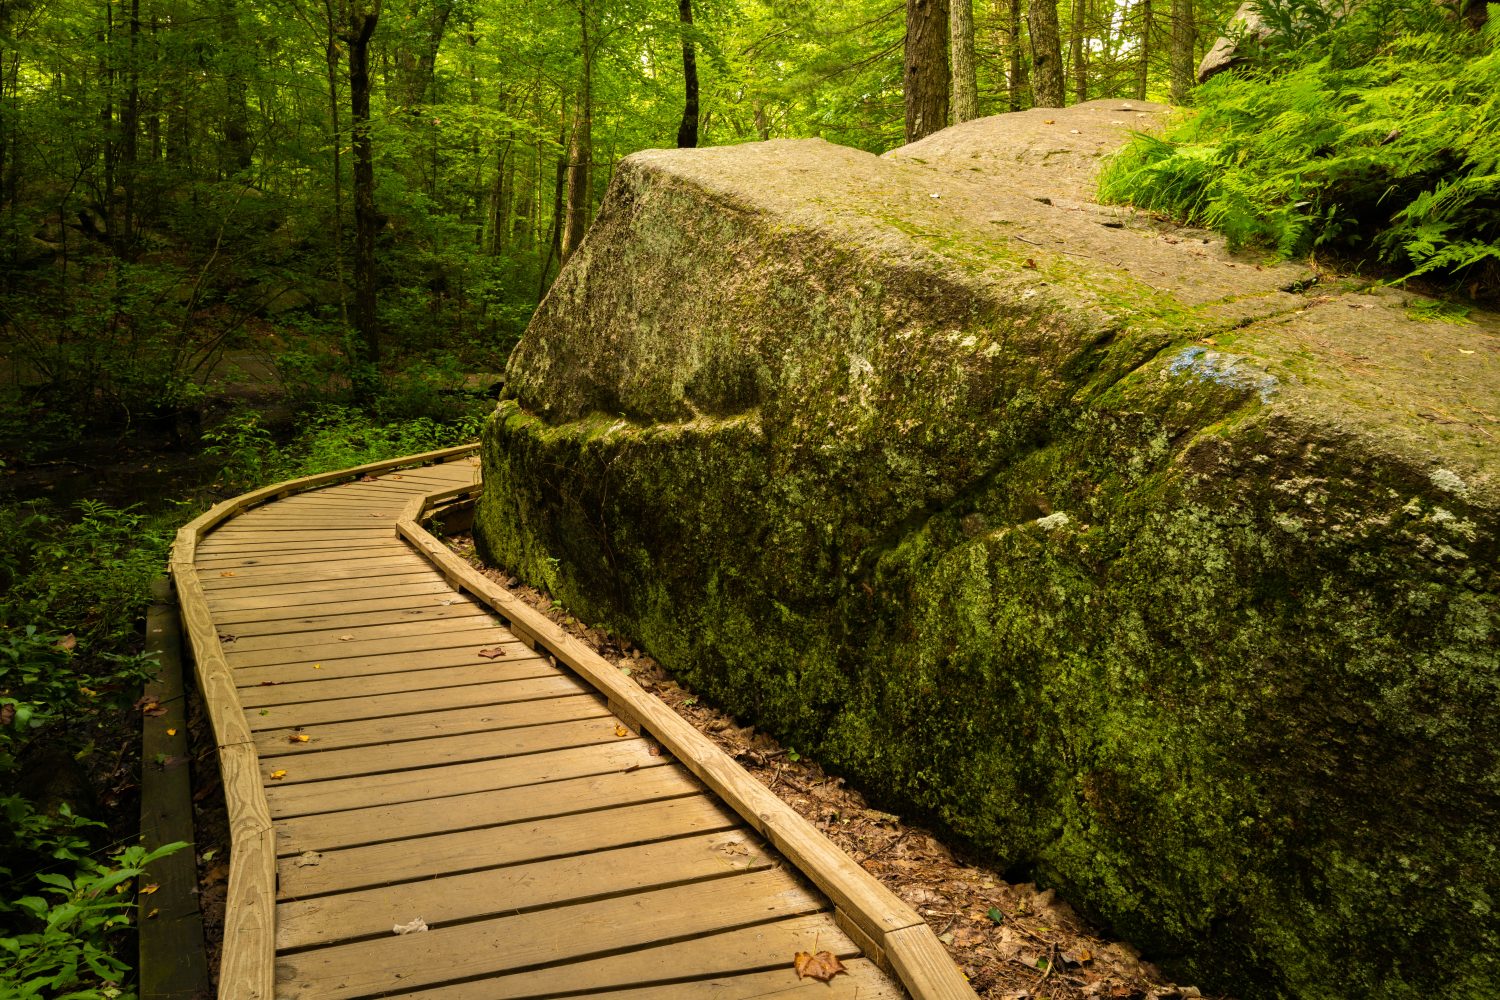 Boardwalk along the glacial rocks in the forest at Purgatory Chasm Park in Massachusetts. Curved footpath in the state preservation in New England.